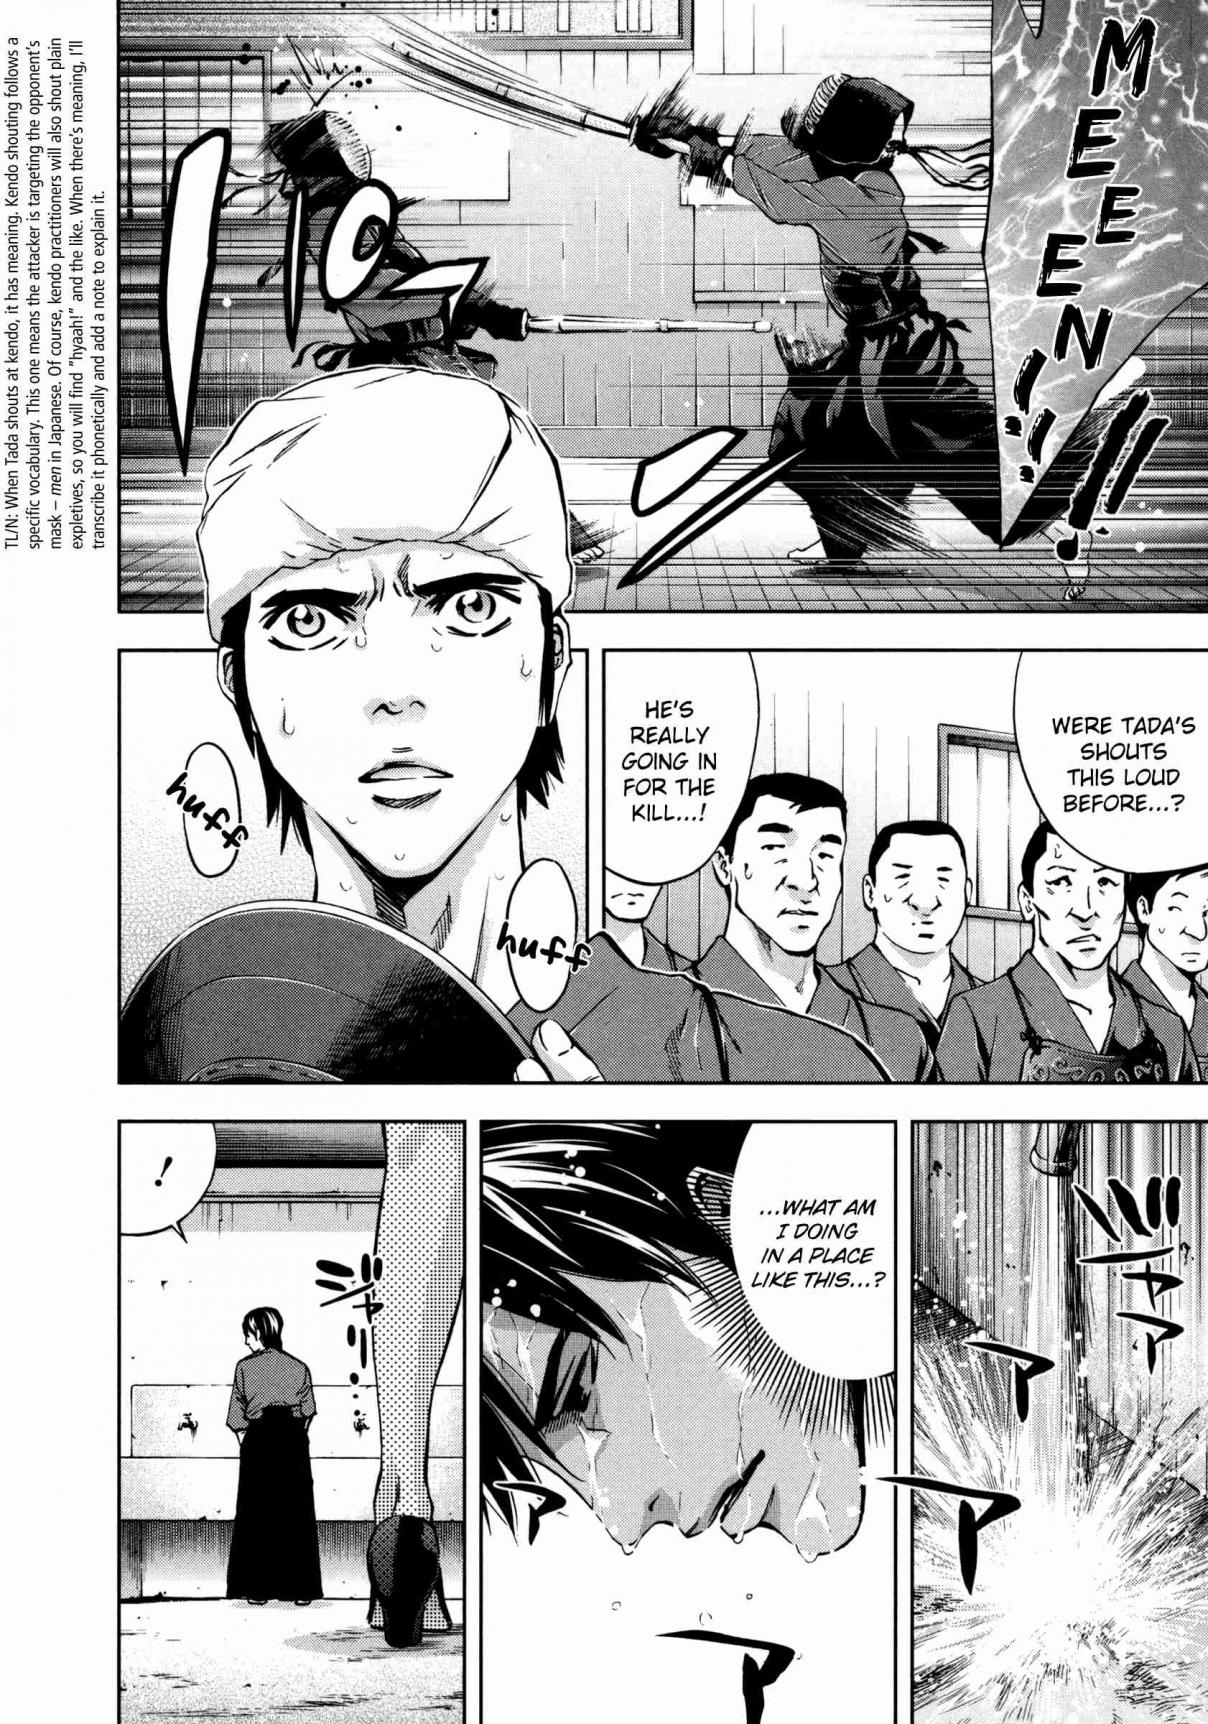 Funouhan Vol. 4 Ch. 24 Scandal (first part)